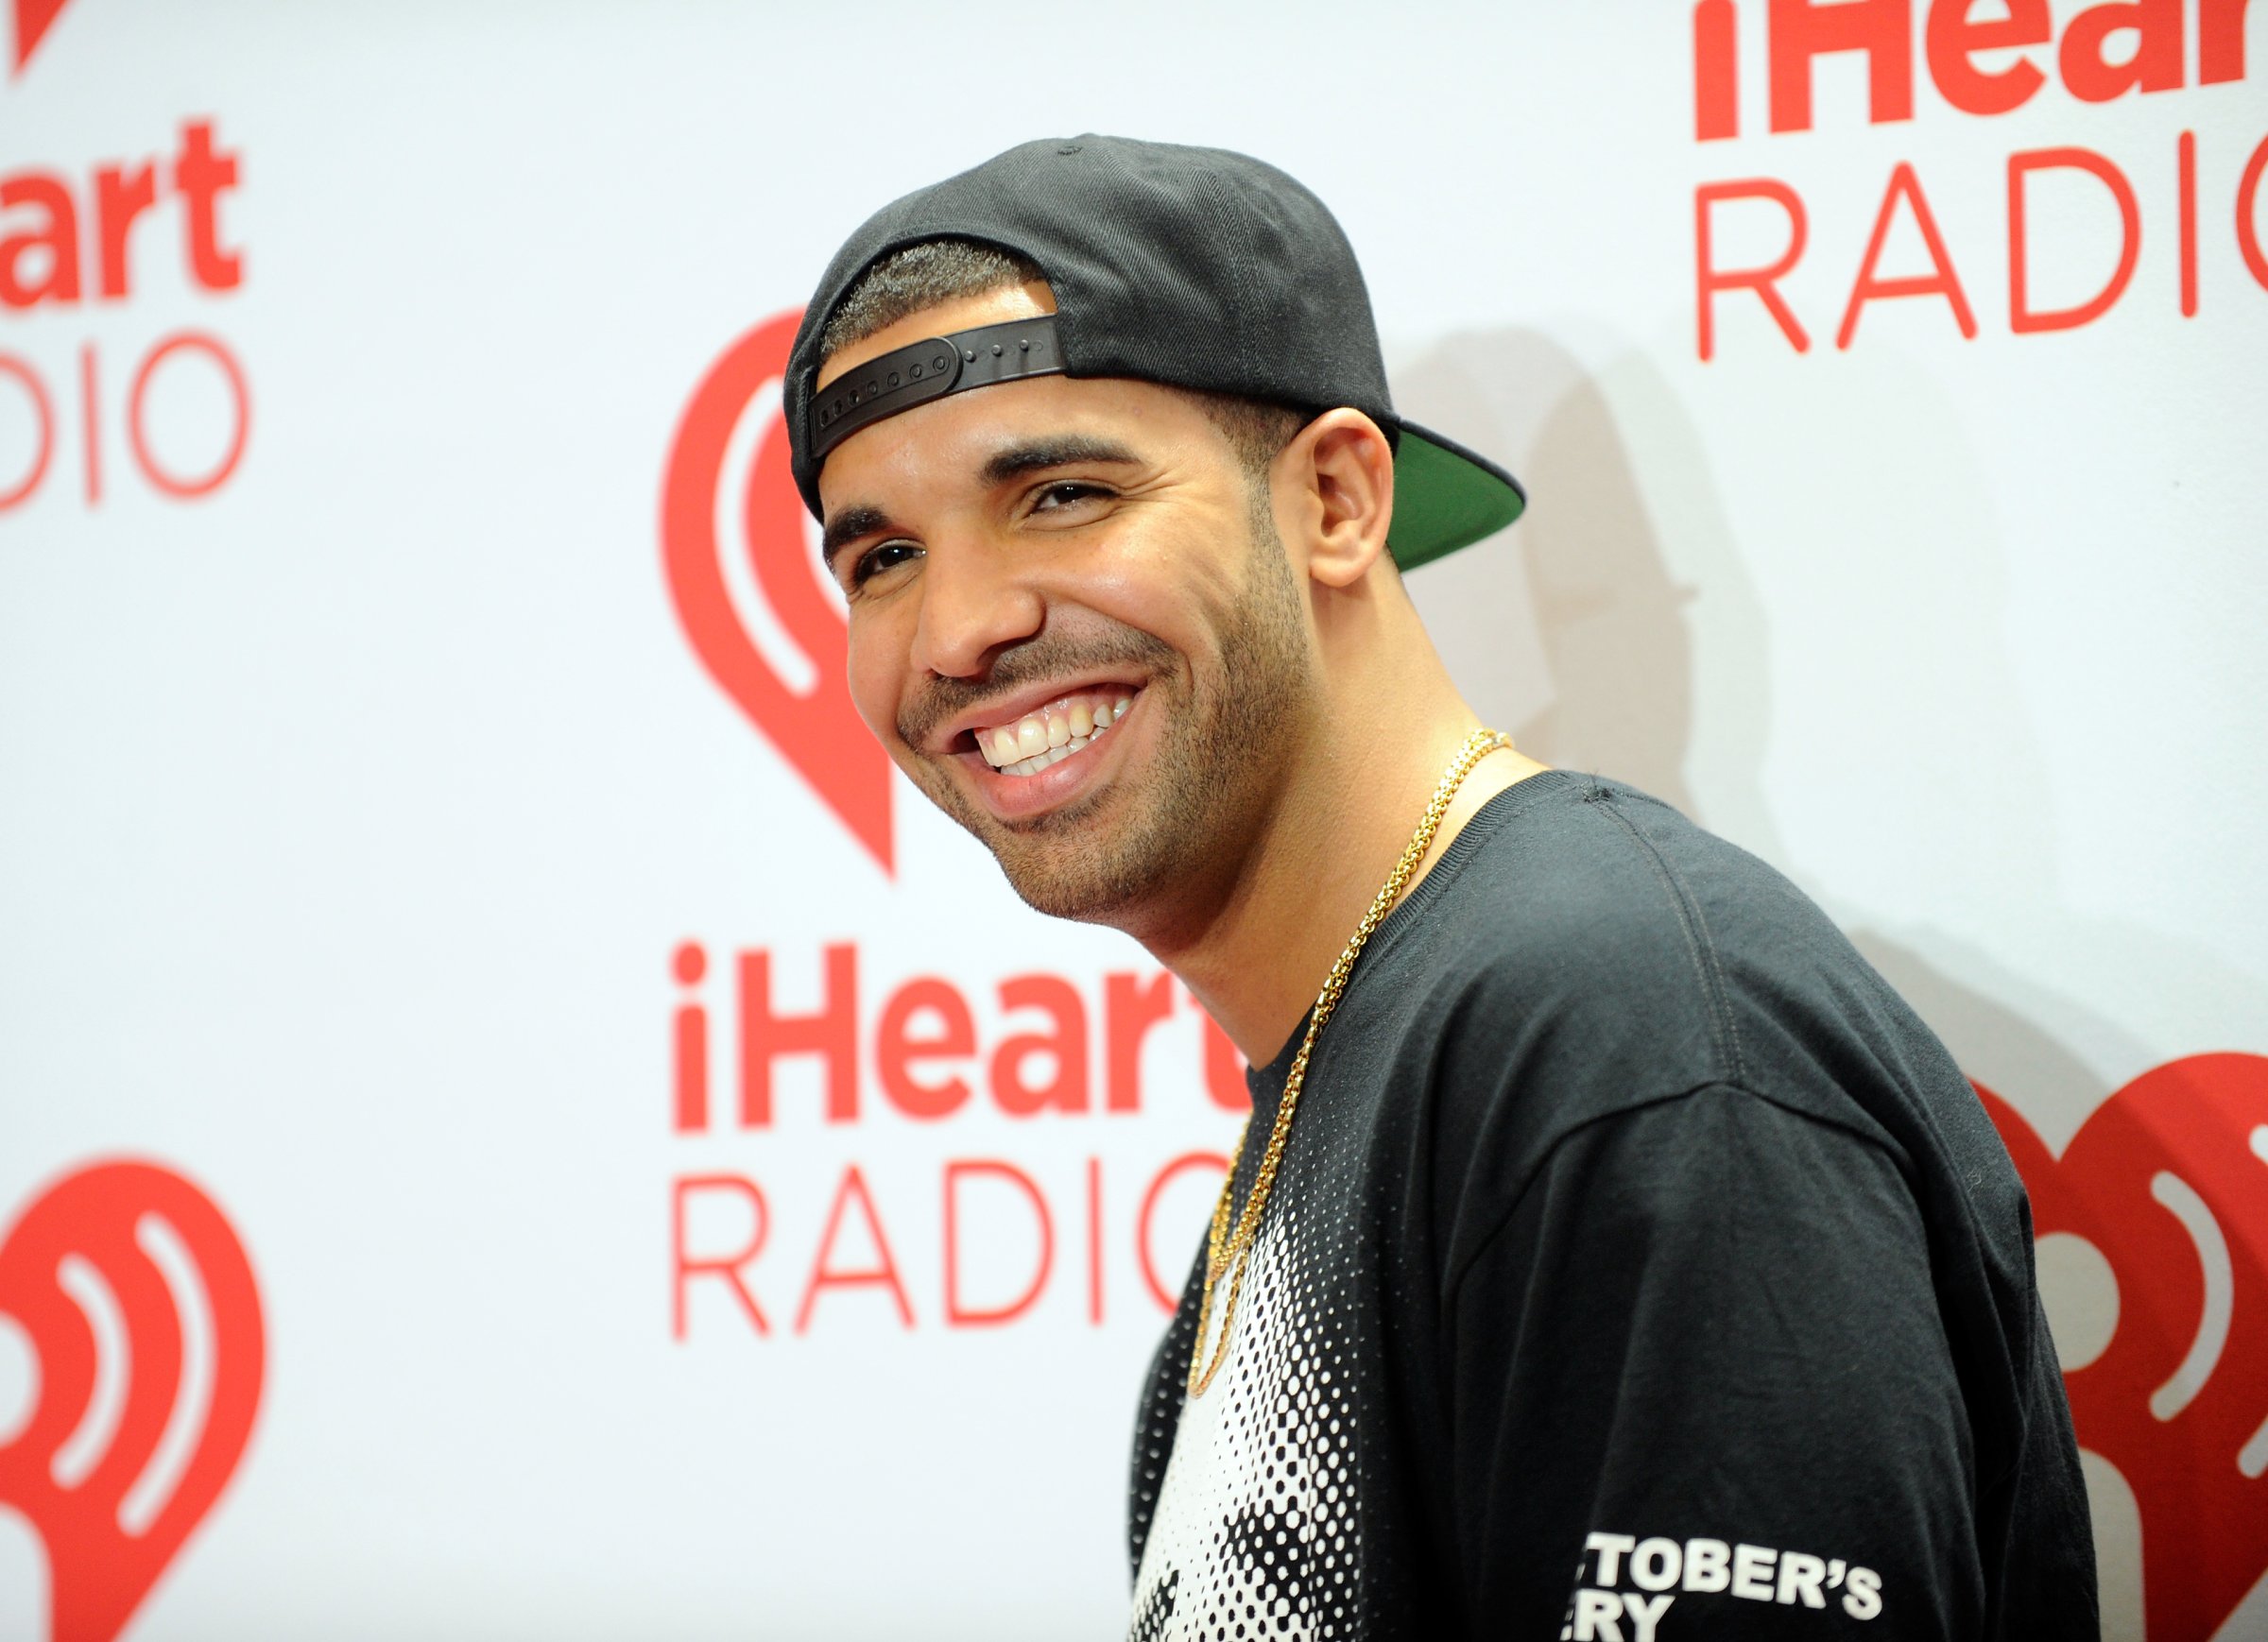 Singer Drake attends the iHeartRadio Music Festival at the MGM Grand Garden Arena in Las Vegas, on September 21, 2013